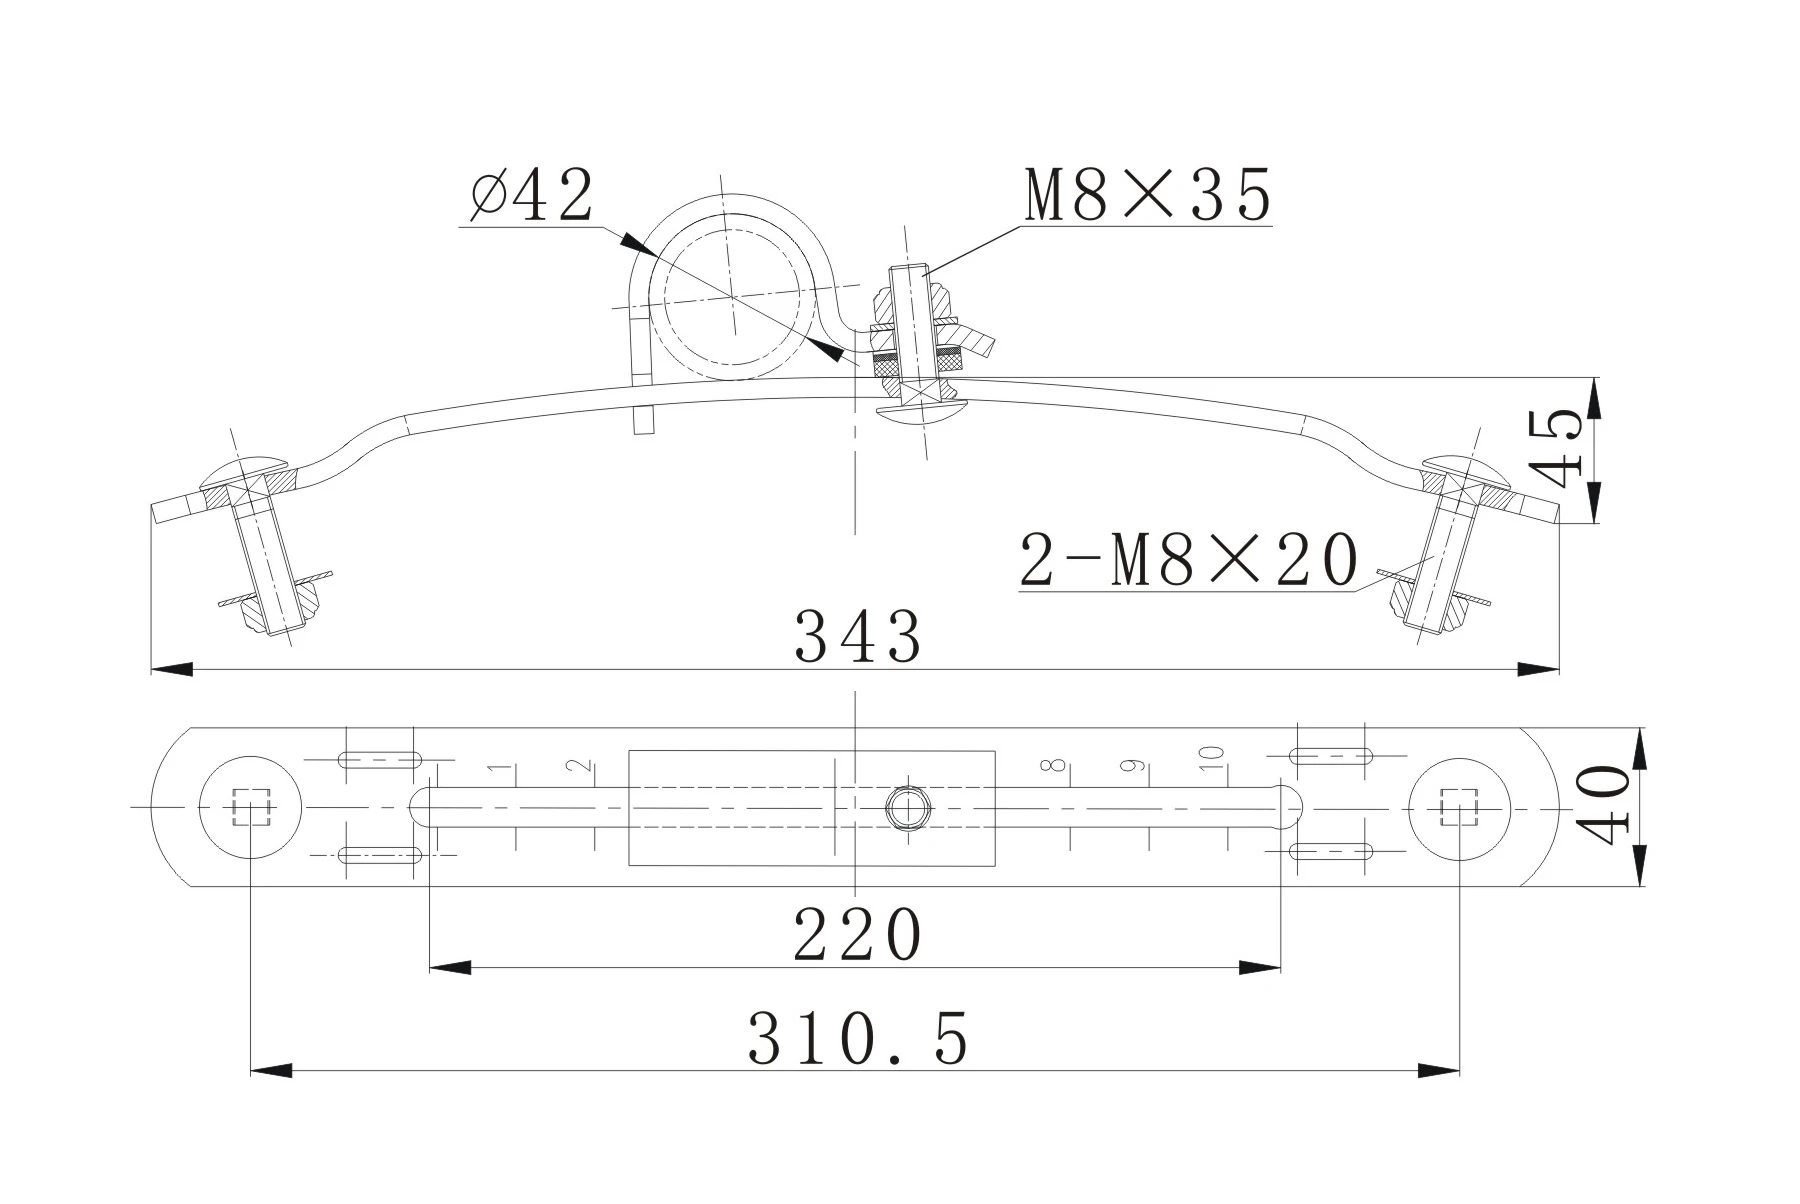 low price steel truck titling lateral protection lateral for mud fender brackets for mudguard